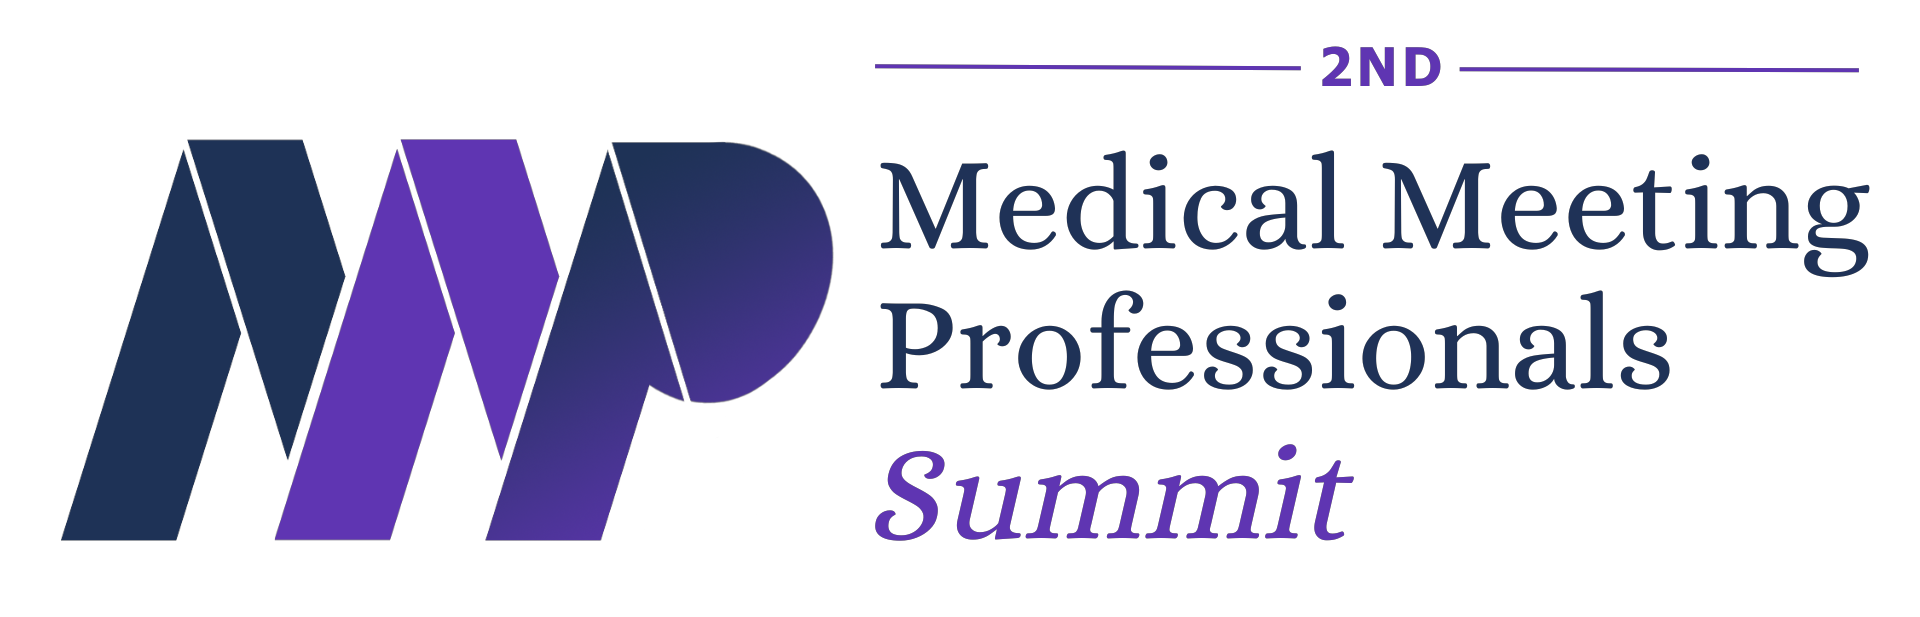 Logo of 2nd Medical Meeting Professionals